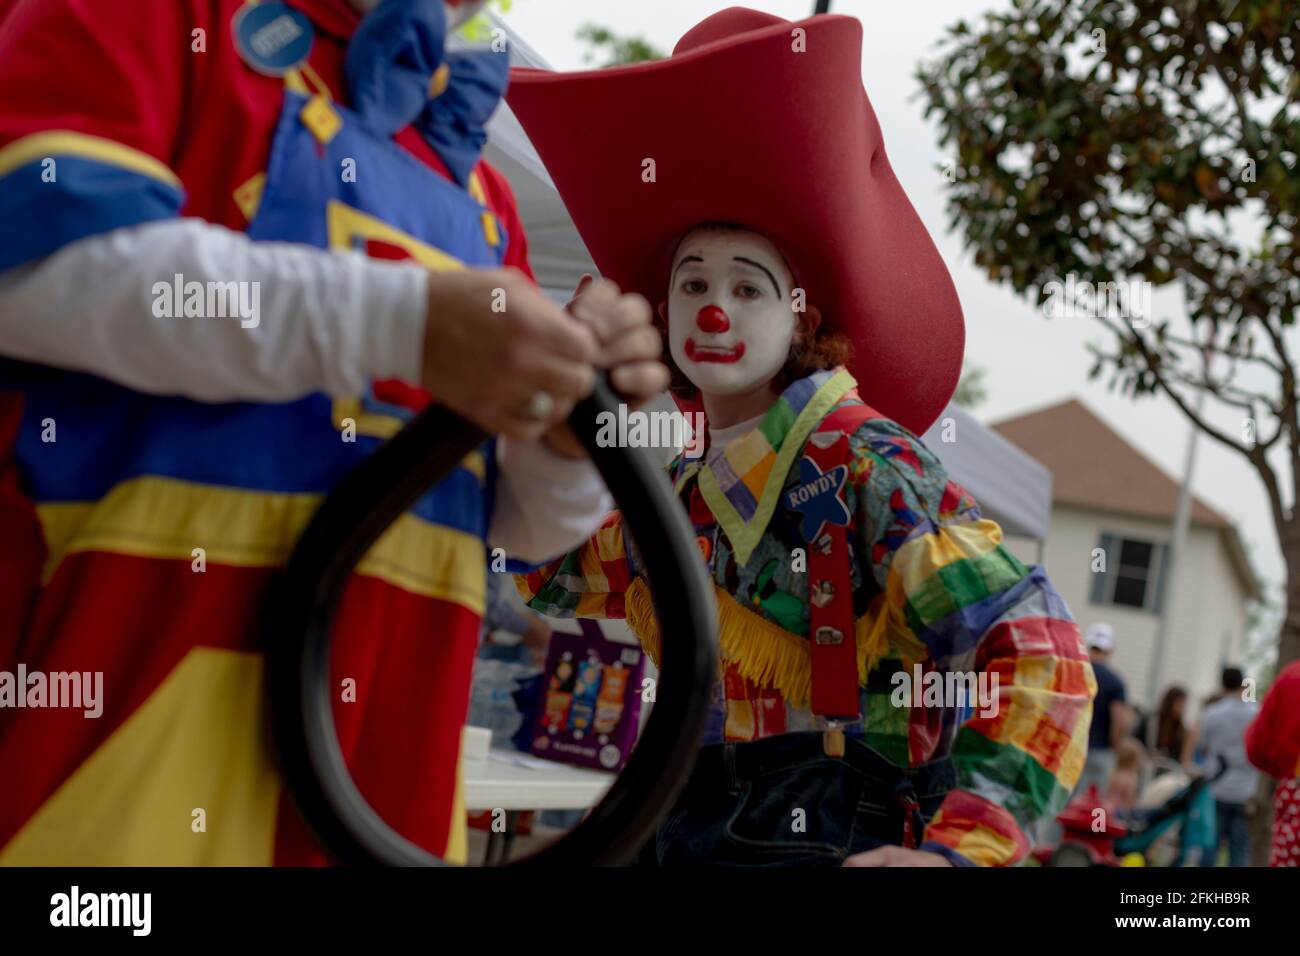 Roanoke, Texas, USA. 1st May, 2021. 5/1/21 Roanoke, Texas - A clown helps fellow clones blow balloons from kids during the 5th Annual Roanoke Roundup. This is one of the first public fairs that have taken place since Texas has opened up 100% since the COVID-19 pandemic hit the state. Credit: Chris Rusanowsky/ZUMA Wire/Alamy Live News Stock Photo